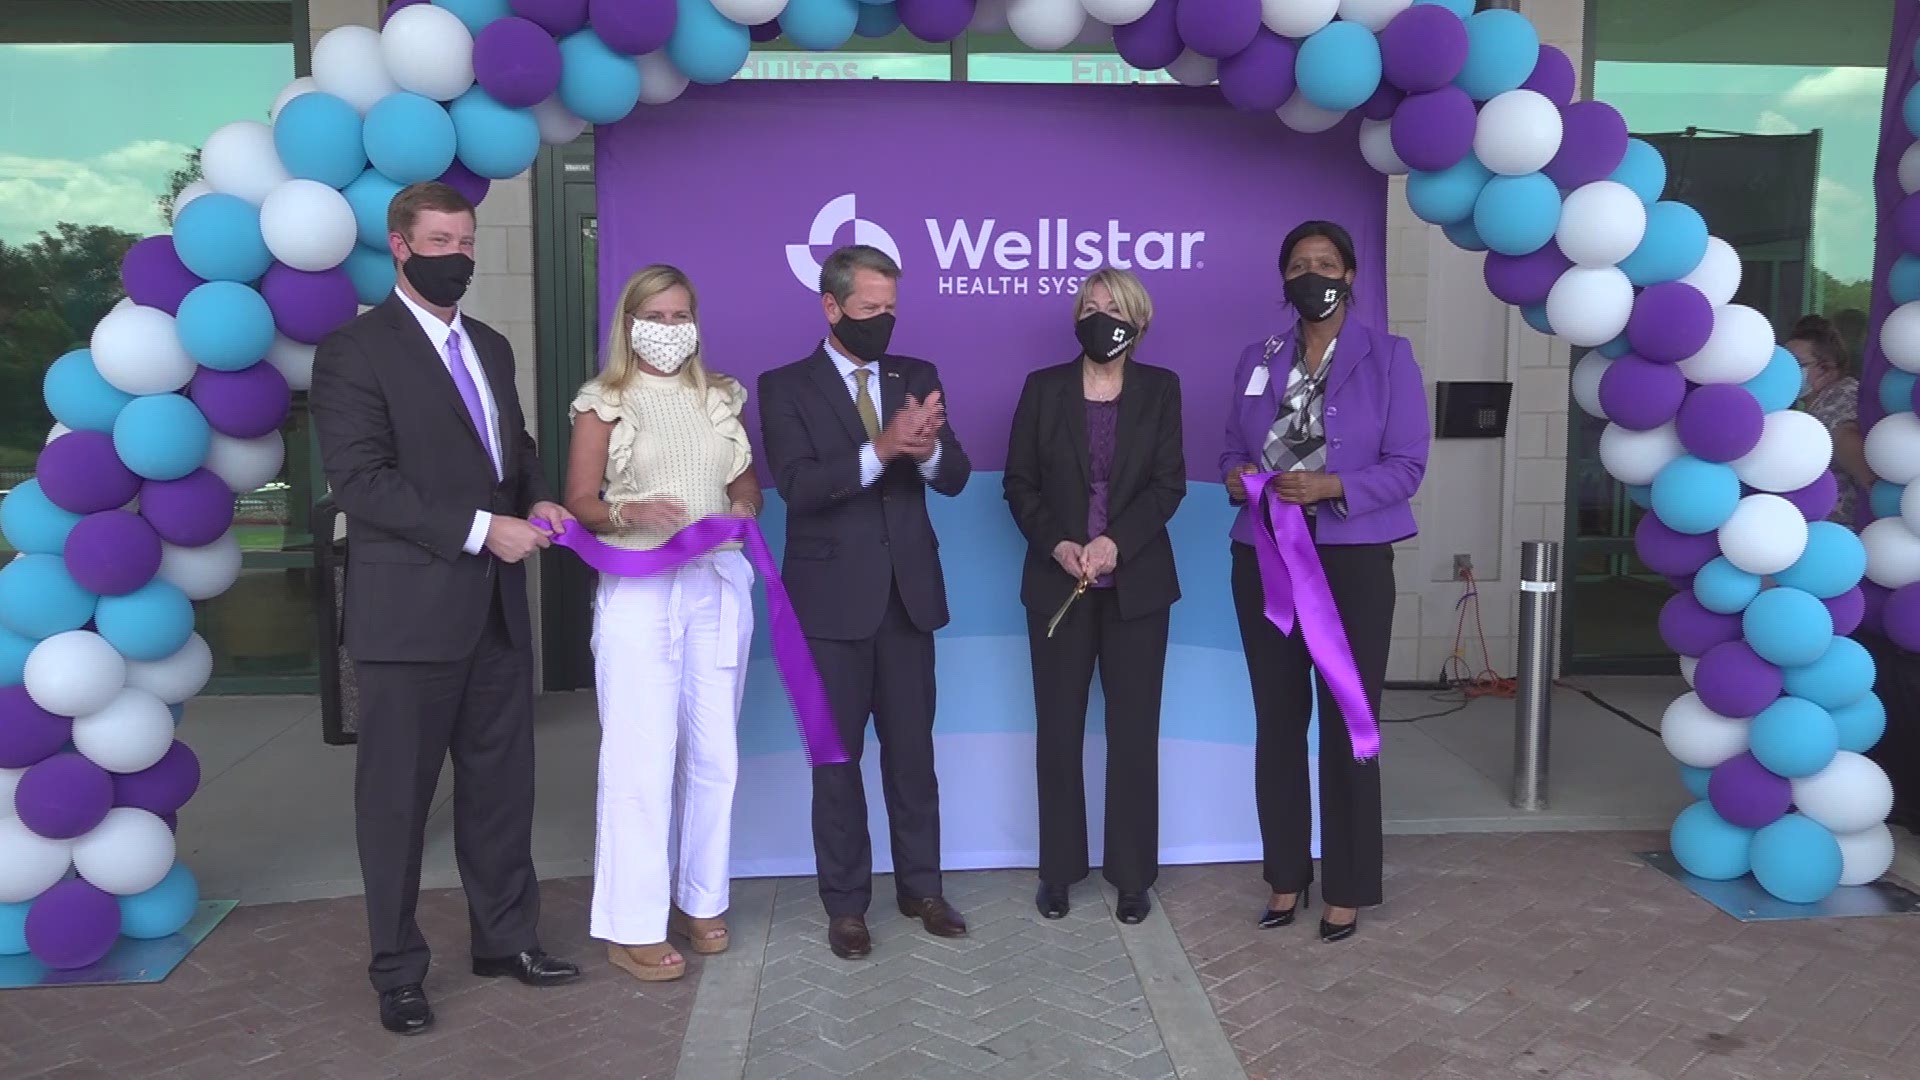 Wellstar Kennestone Hospital’s state-of-the-art emergency department held a ribbon cutting ceremony ahead of next weeks opening.